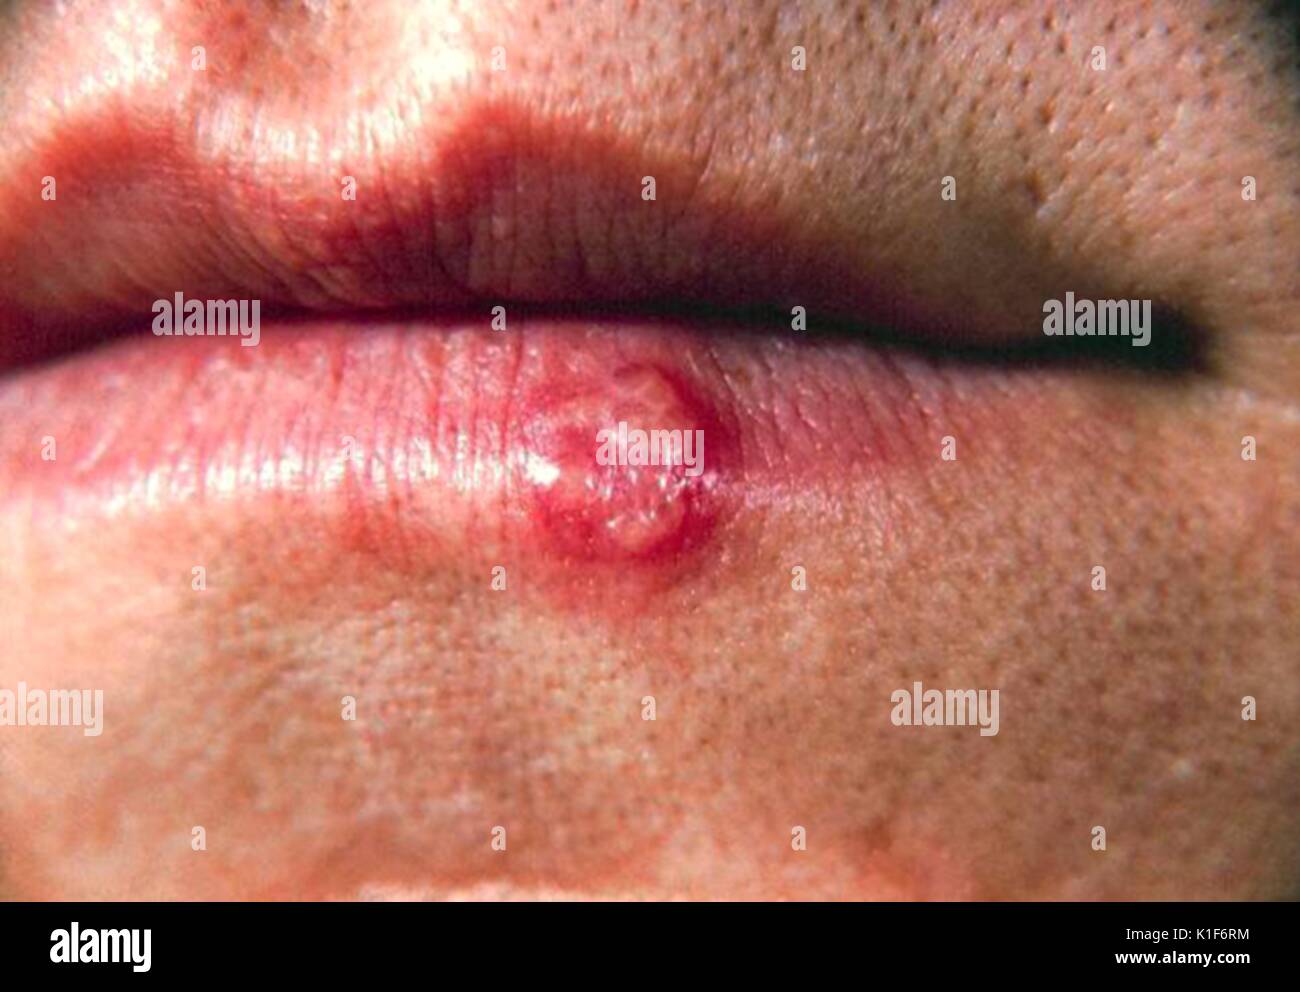 This is a close-up of the lip of patient (PHIL 5434) with a herpes simplex lesion on the lower lip due to the (HSV1) pathogen. Herpes simplex virus type1 usually is the cause for oral lesions sometimes referred to as ?cold sores?, ?fever blisters? or more technically known as ?recurrent herpes labialis?. Image courtesy CDC/Dr. Herrmann, 1964. Stock Photo